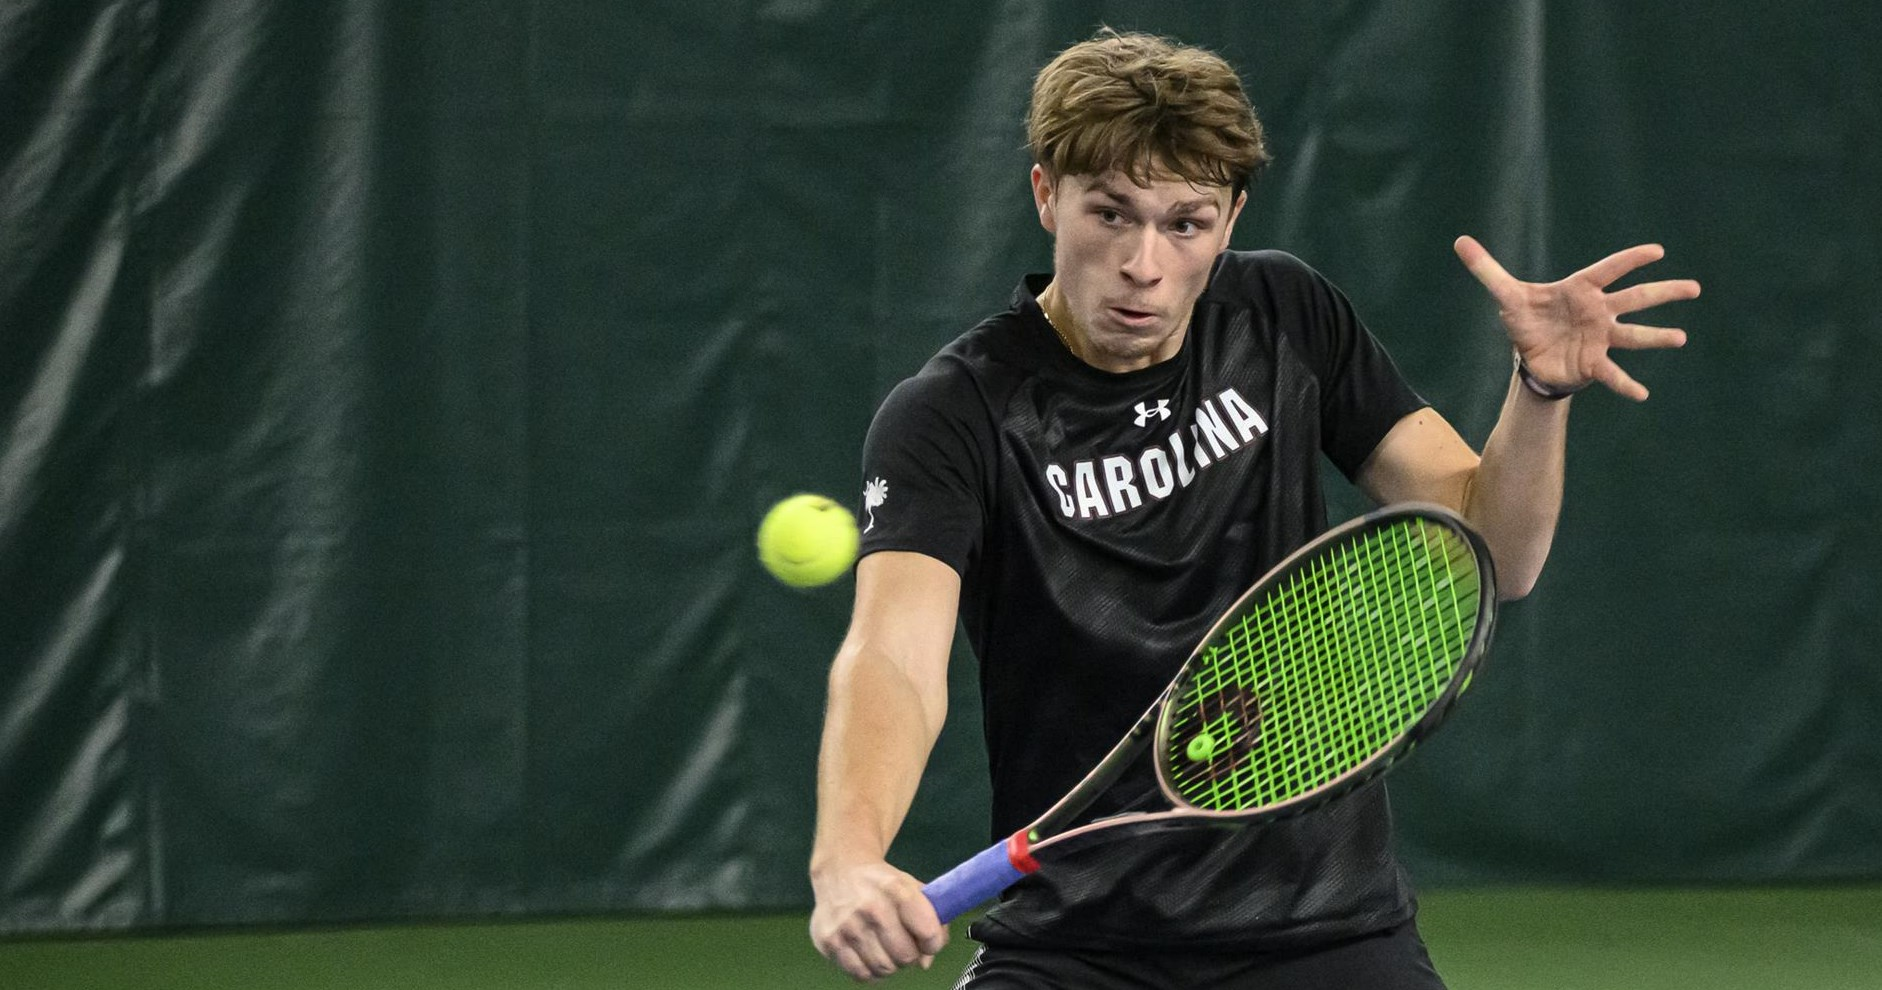 Gamecocks Advance to Quarterfinals at ITA Indoor National Championships